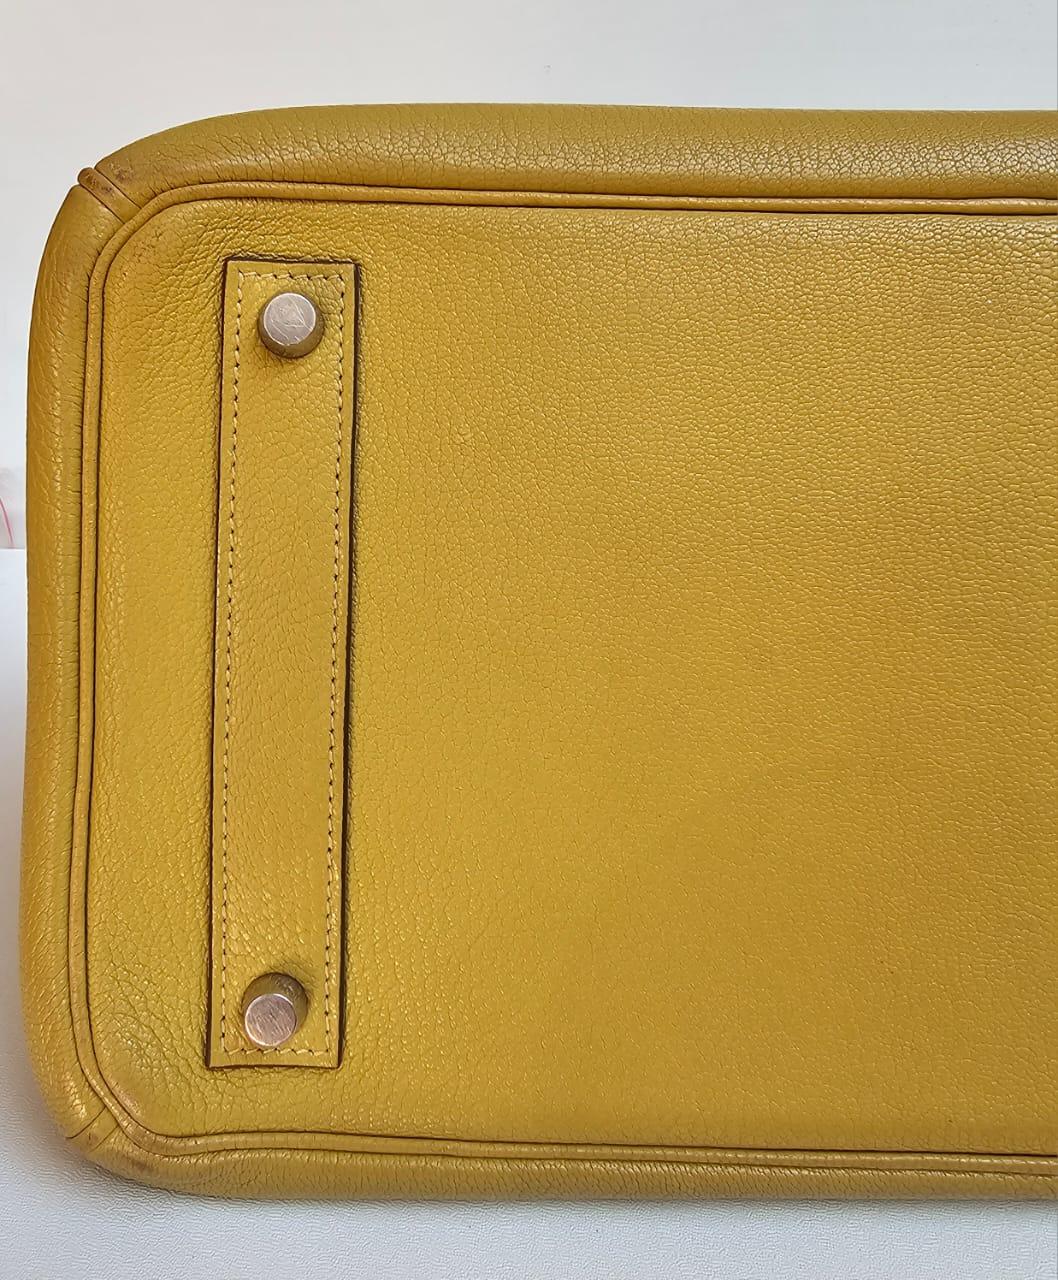 Beautiful rare birkin hac 36 in lime chevre with palladium hardware. Overall still in great condition. Light rubbing marks on the backside due to the nature of the leather. Handle has slighly suppled. Comes with dust bag, clochette, keys, padlock,